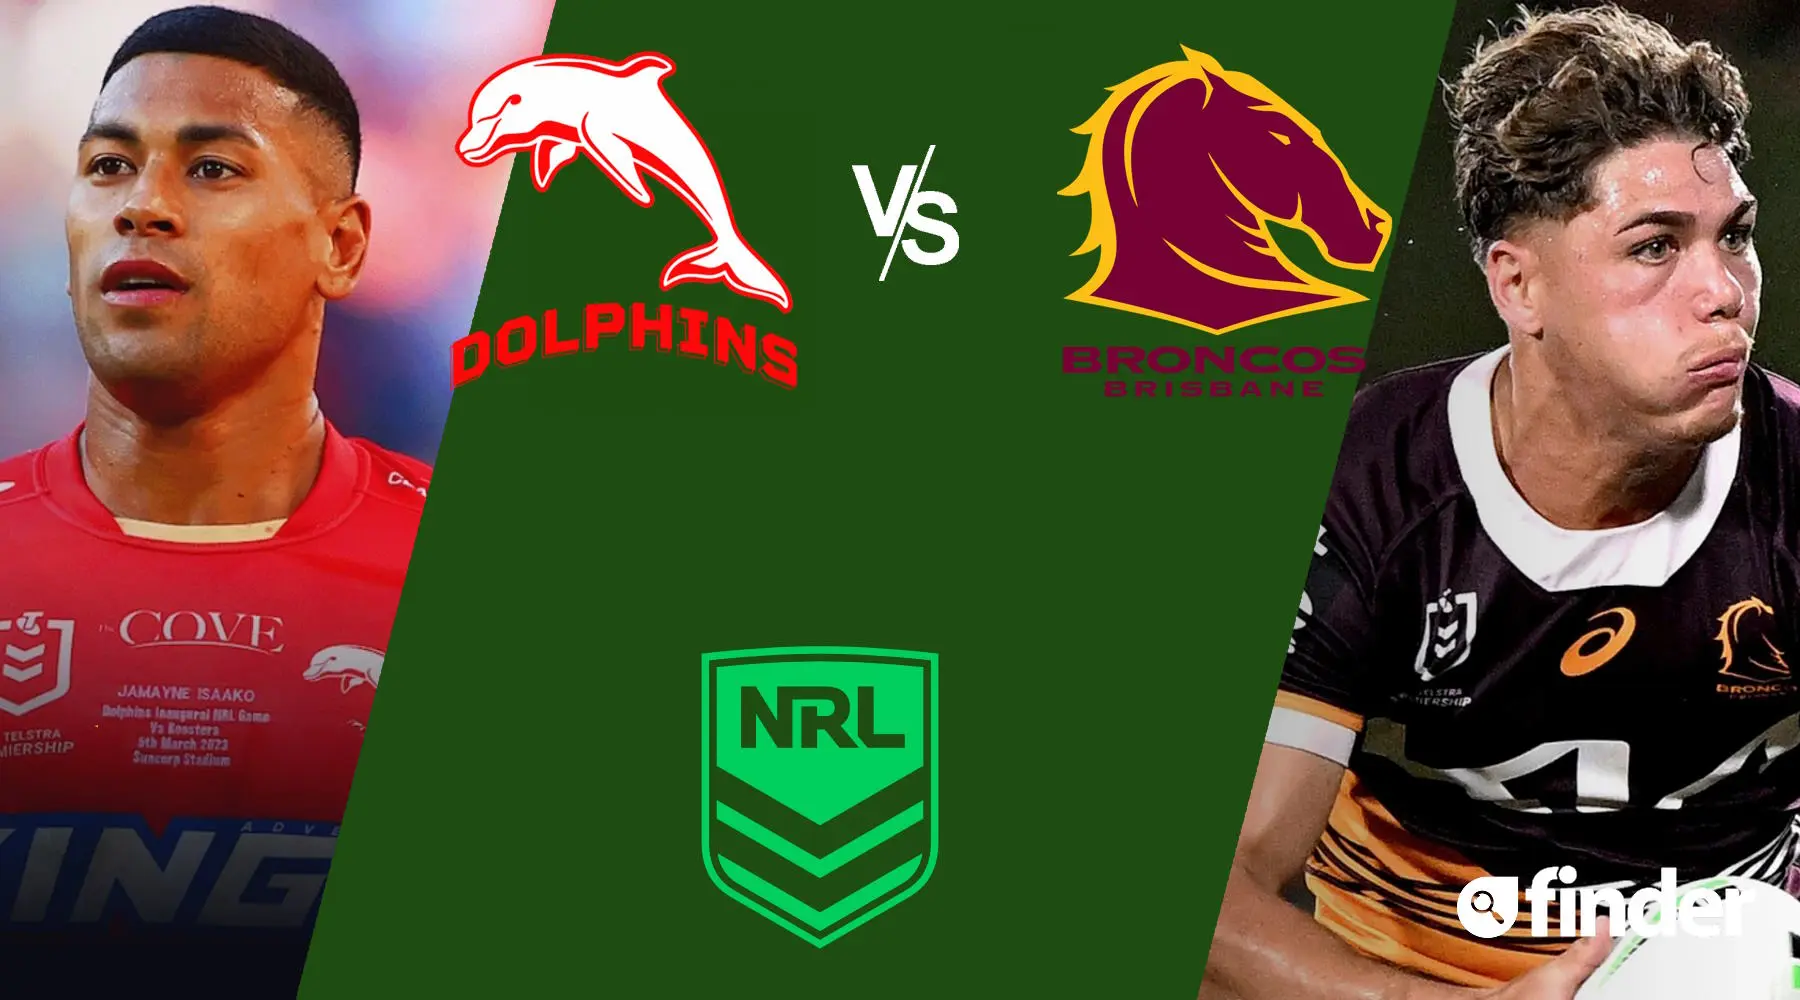 How to watch Dolphins vs Broncos NRL live and match preview